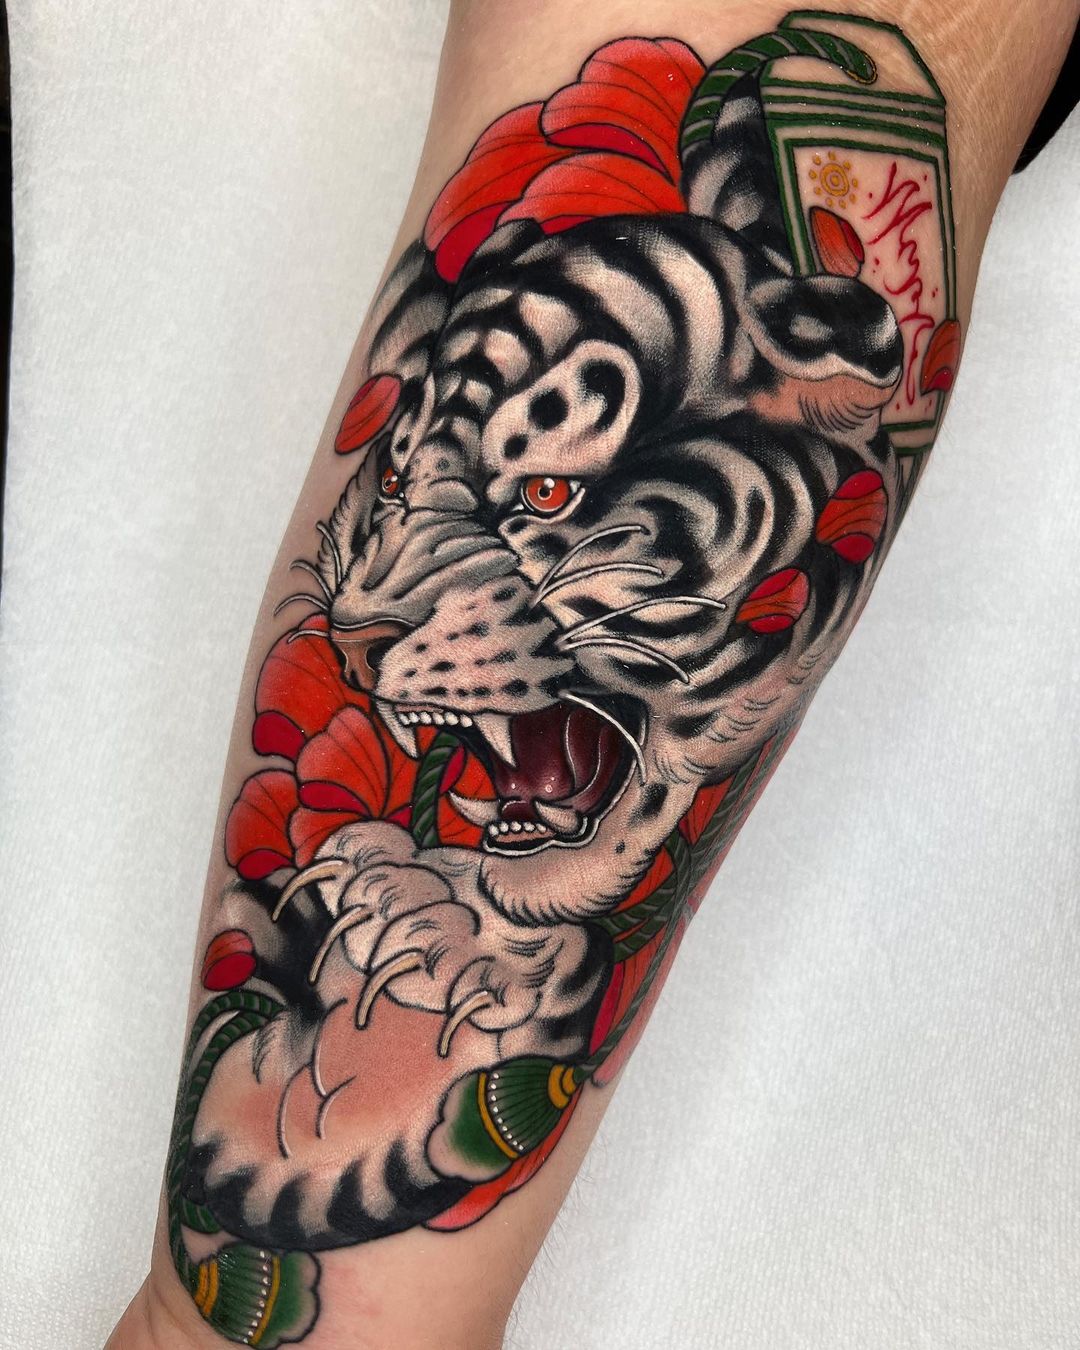 Red and Black Japanese Tiger Tattoo on Arm